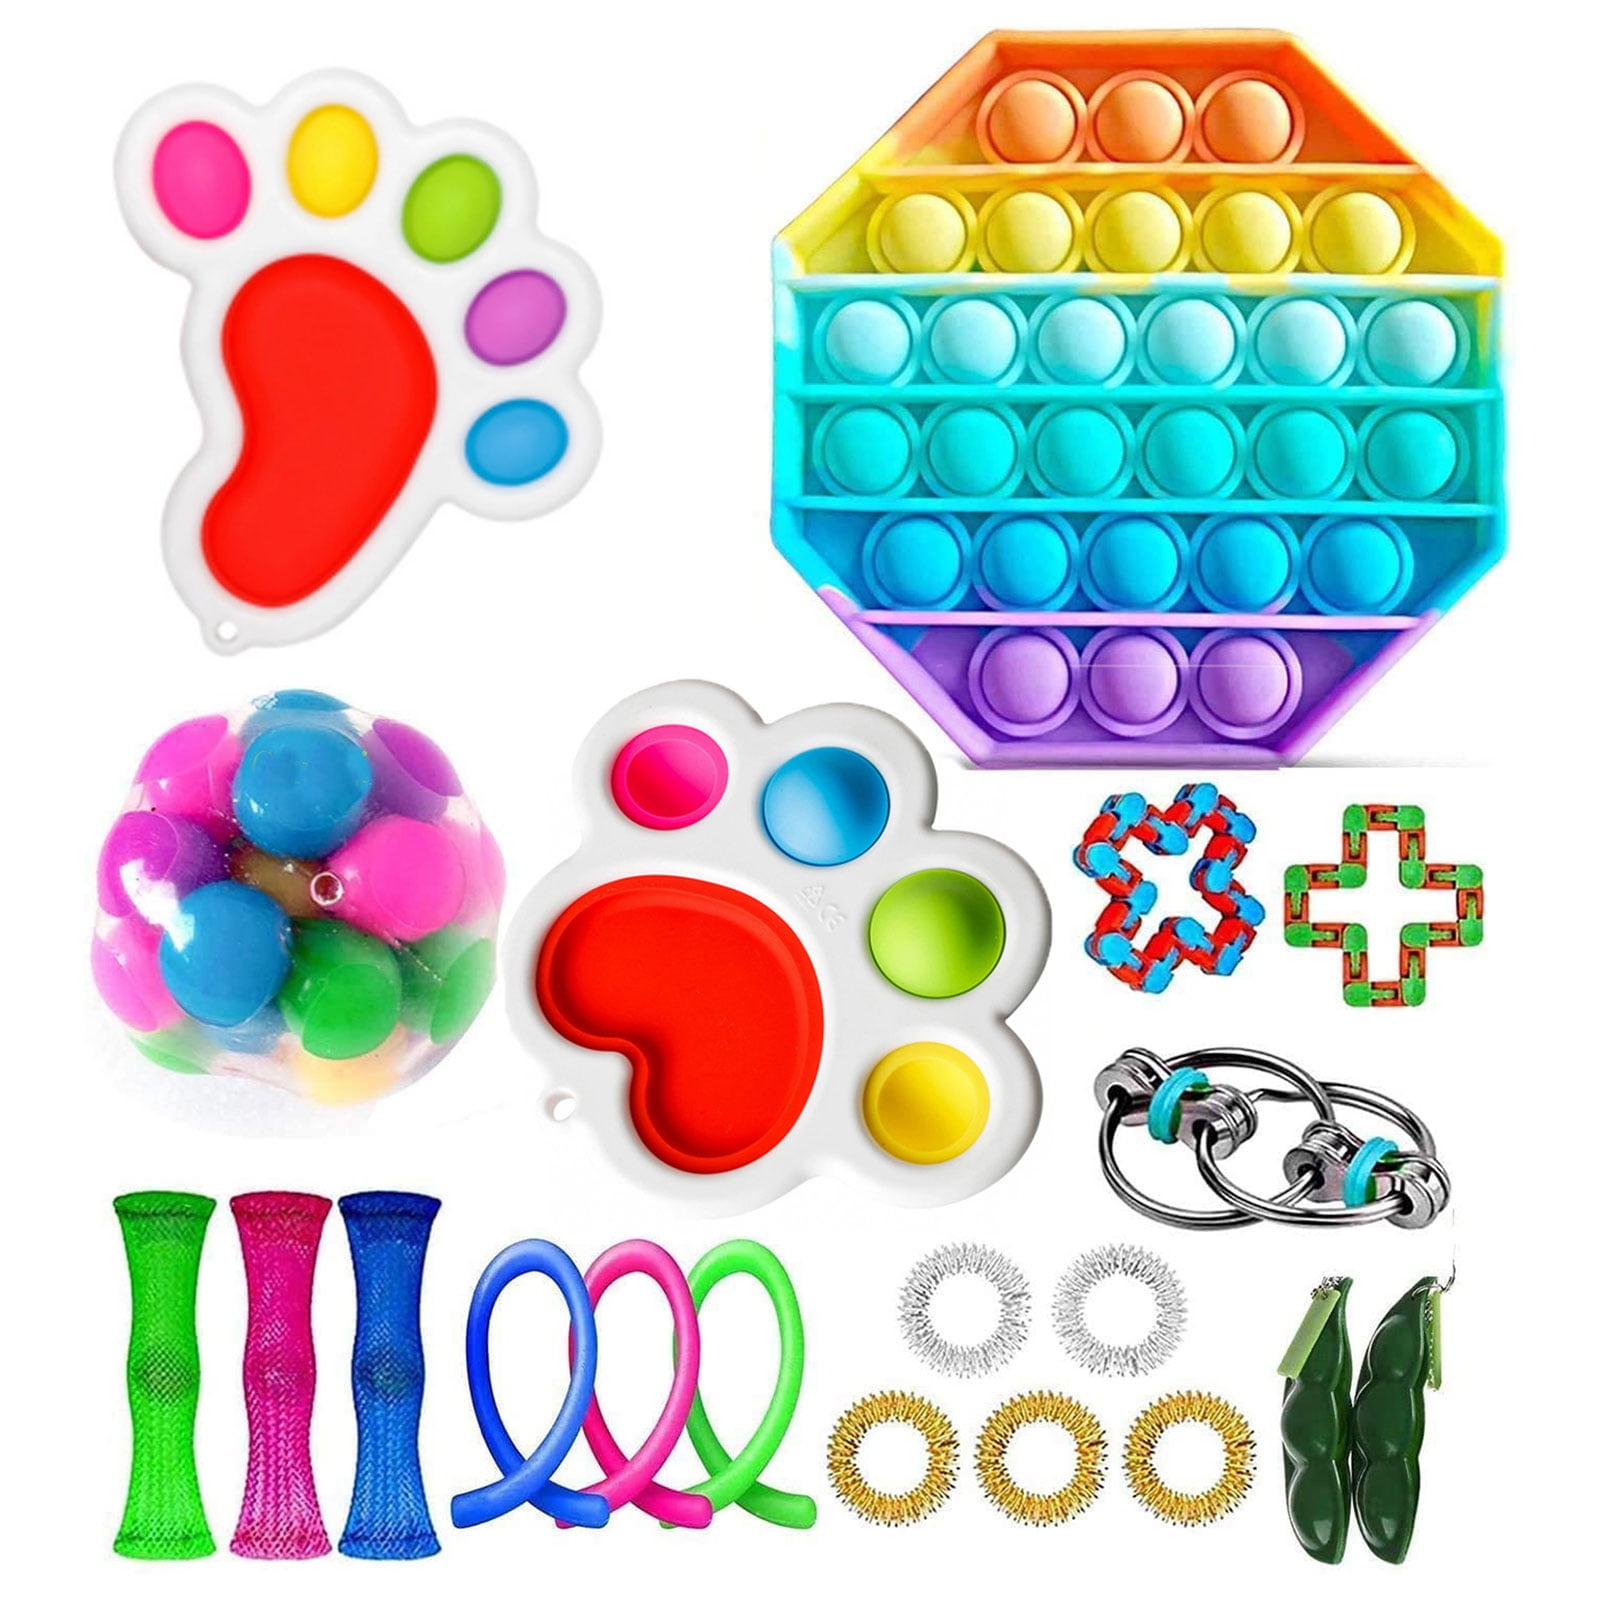 B Push Pop Bubble Keychain Sensory Therapy Toys for Home Office School 2021 Infinity Cube Sensory Fidget Toy Stress Relief Anti-Anxiety Autism Hand Toys for Kids Teen Adult